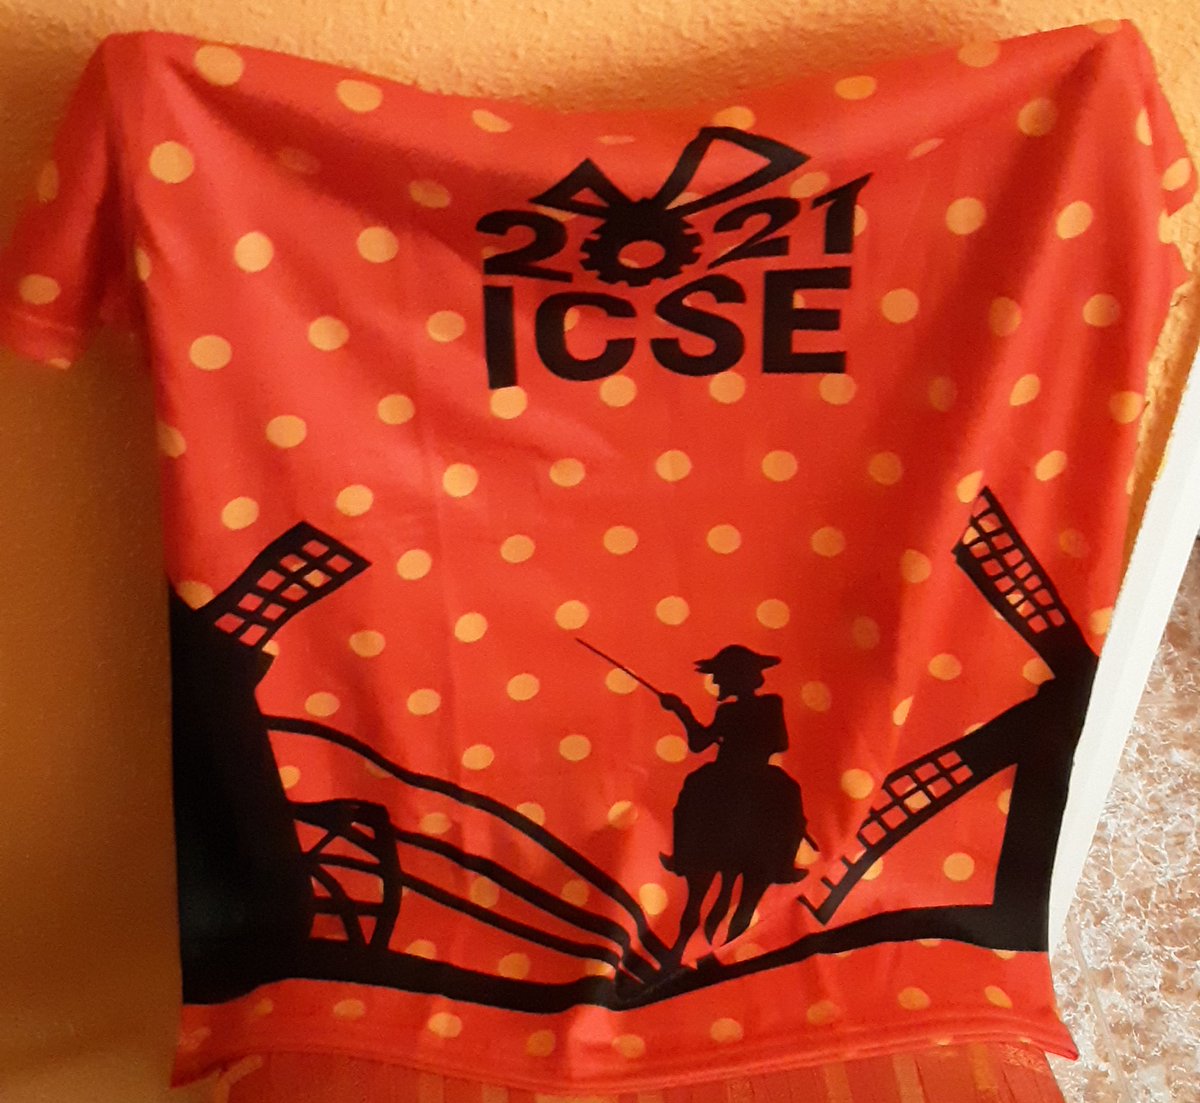 Ready for #ICSE2021 @ICSEconf, the premier #SoftwareEngineering conference, as #an attendee and as a #StudentVolunteer  🤪  #Madrid #Spain #Virtual